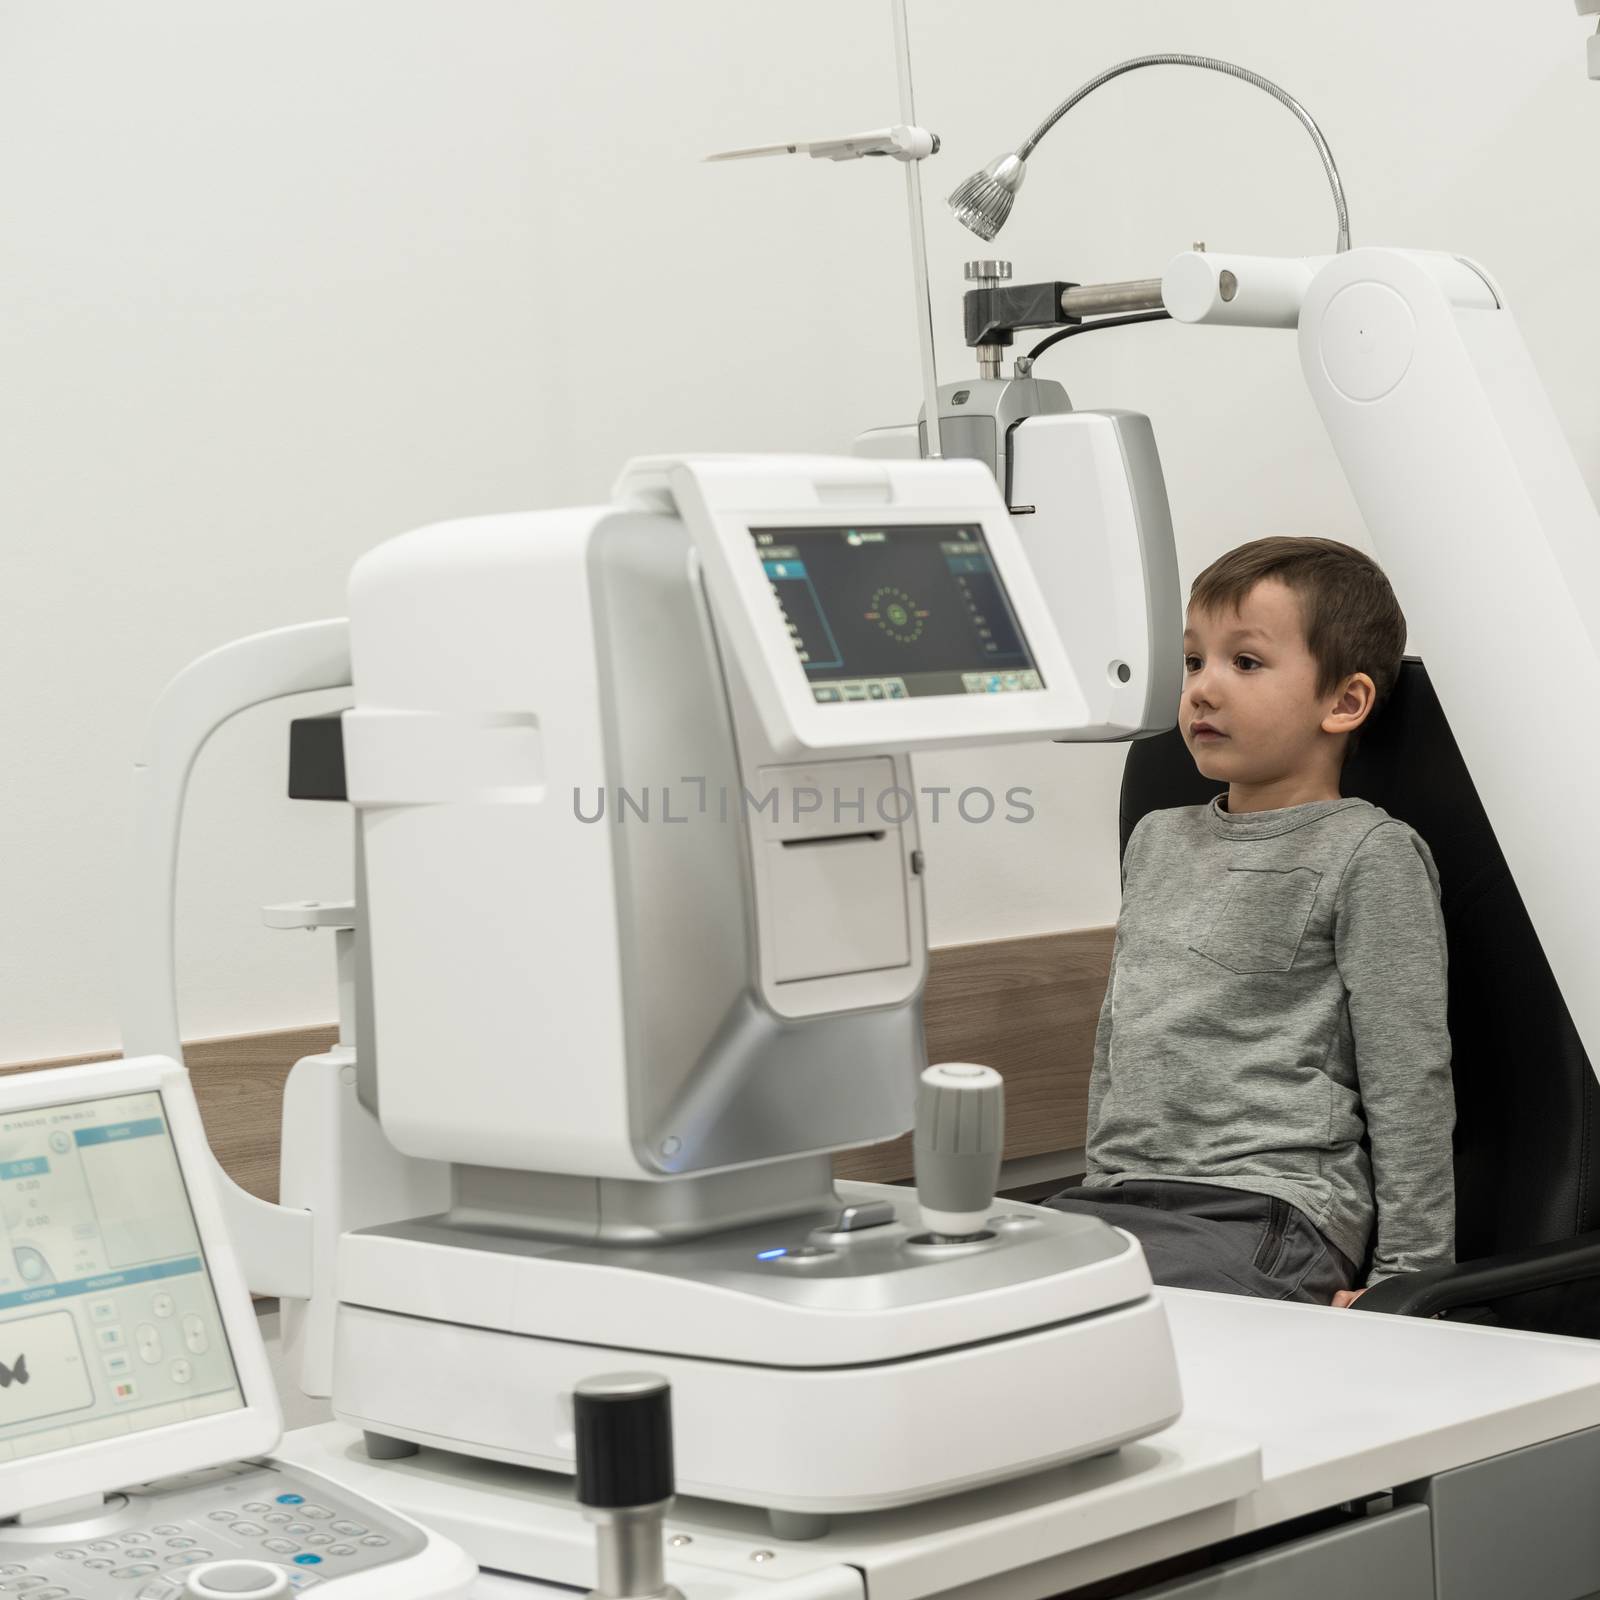 the boy is the patient on reception at doctor ophthalmologist. diagnostic ophthalmologic equipment. medicine concept